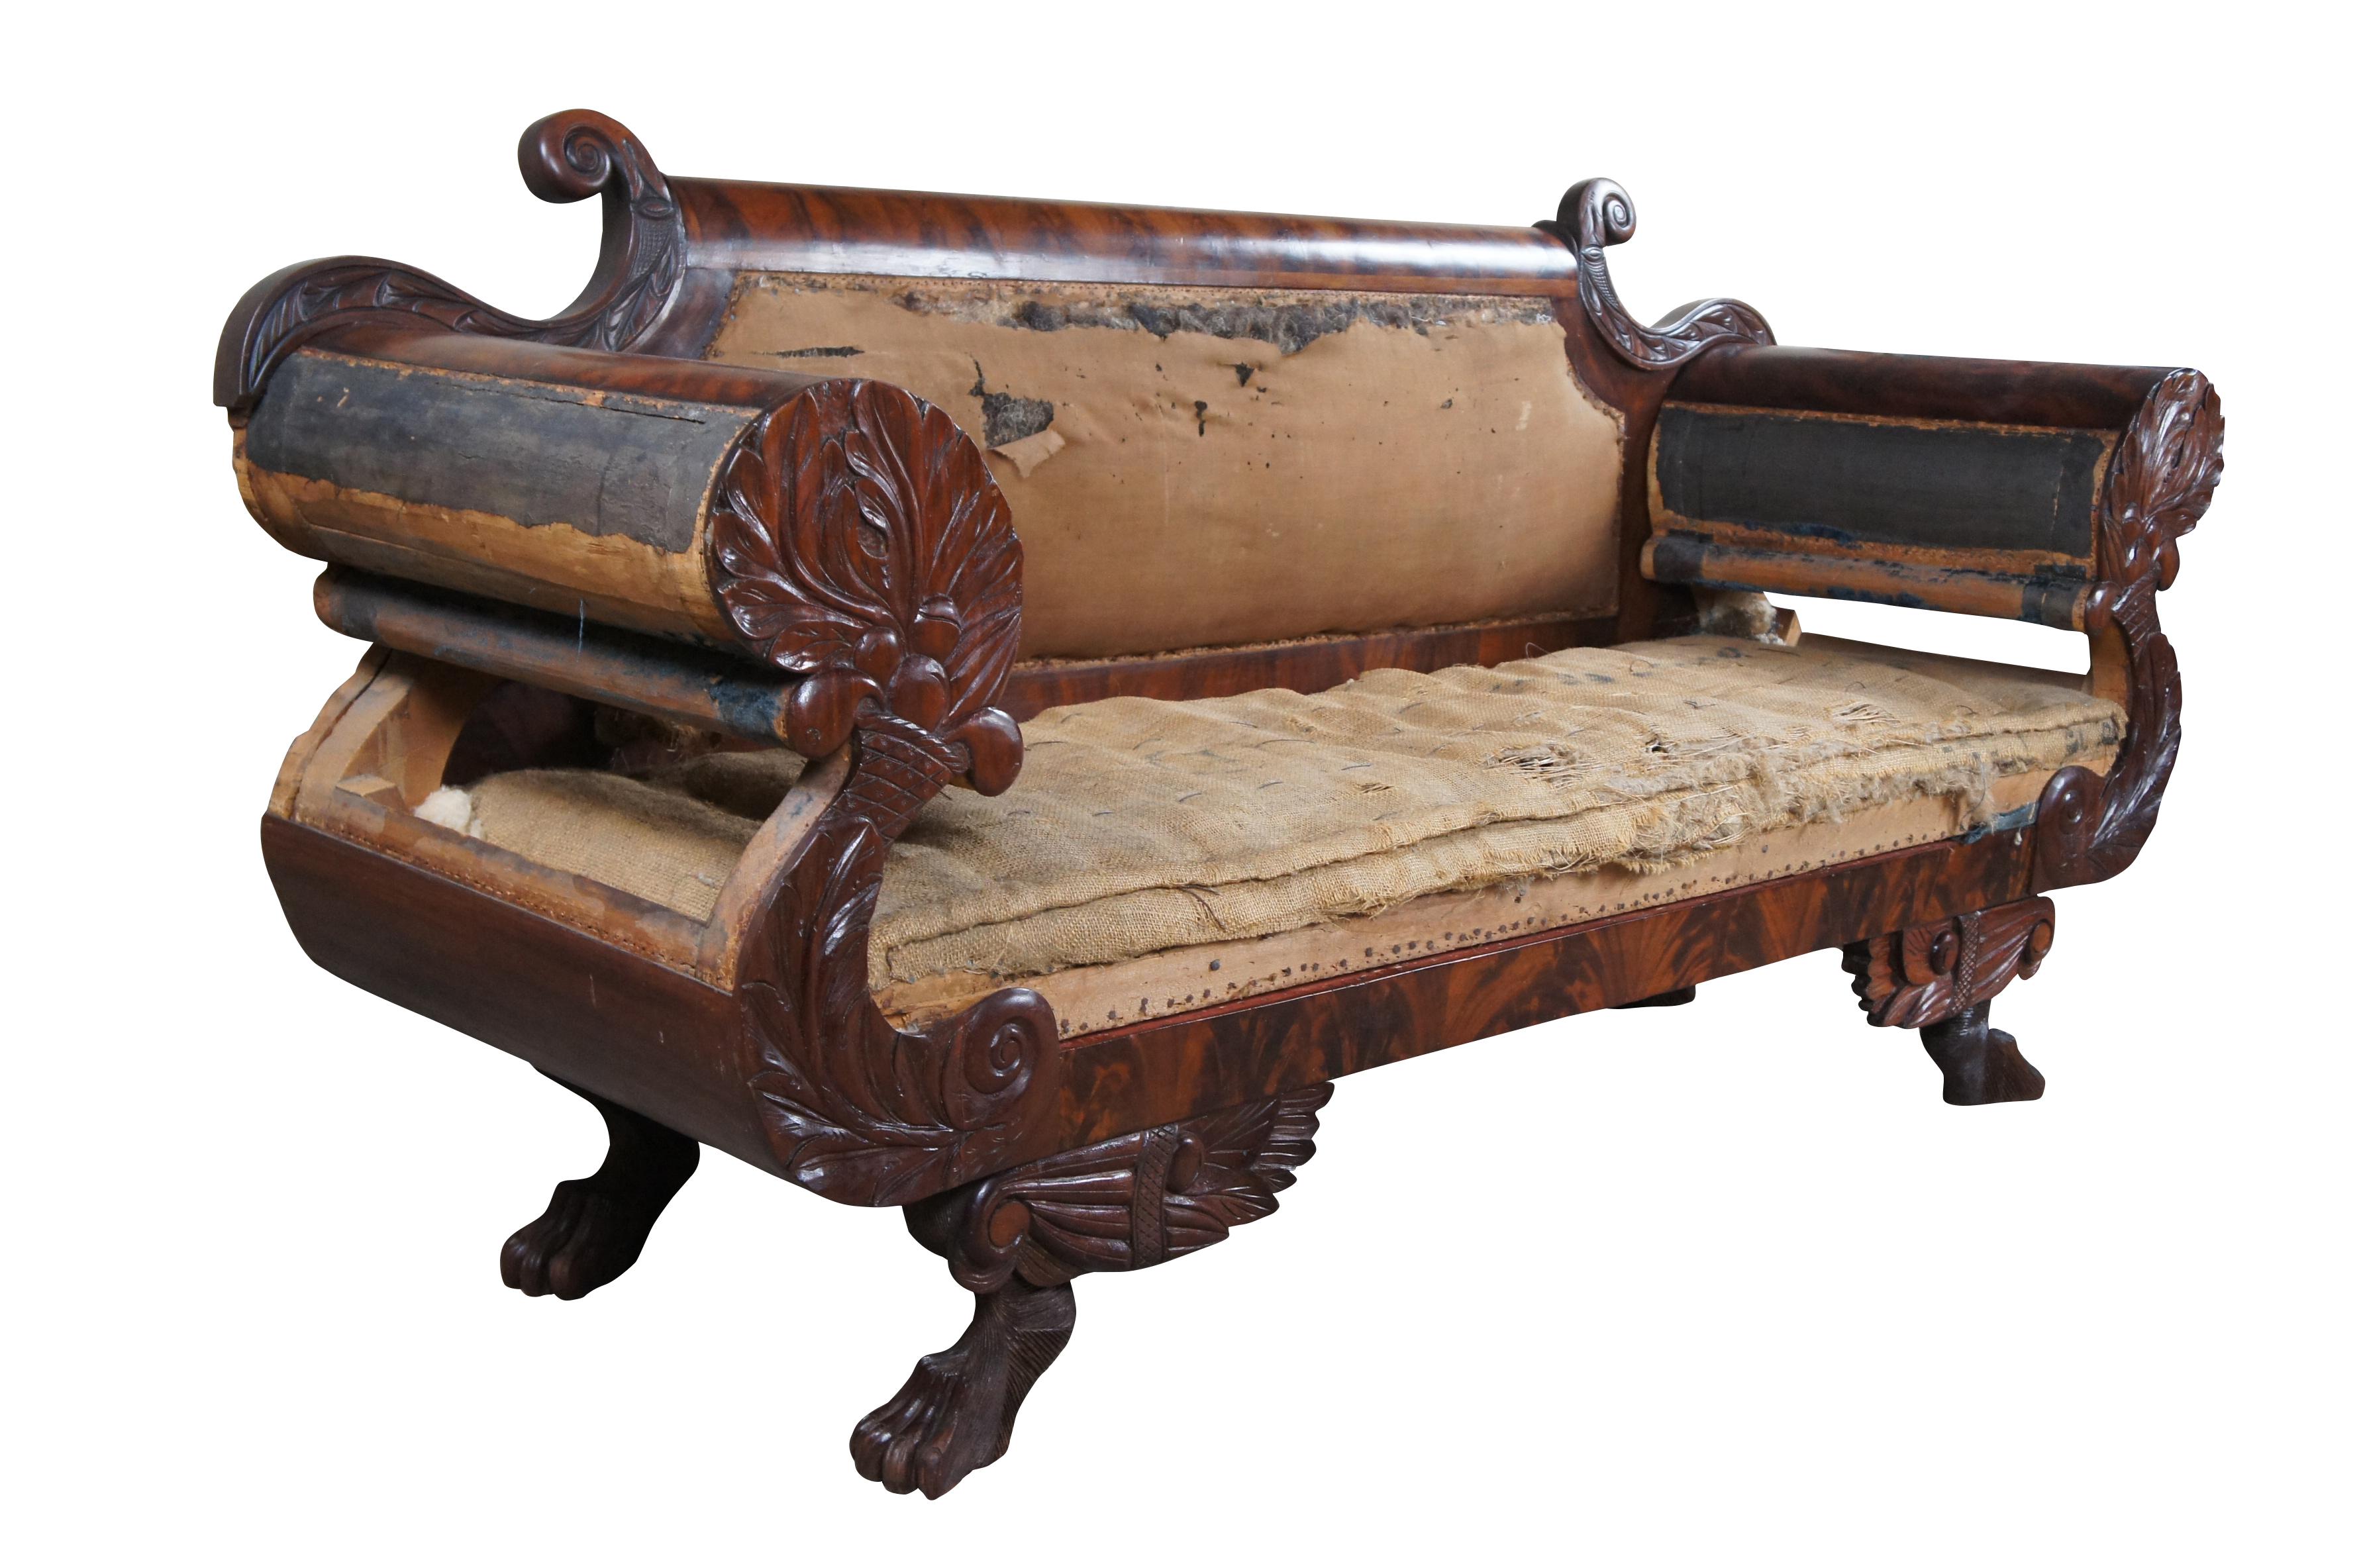 Fine American Empire sofa with striking form and masterful carving, New York; circa 1820s.  Made of flamed mahogany with beveled crest rail between 